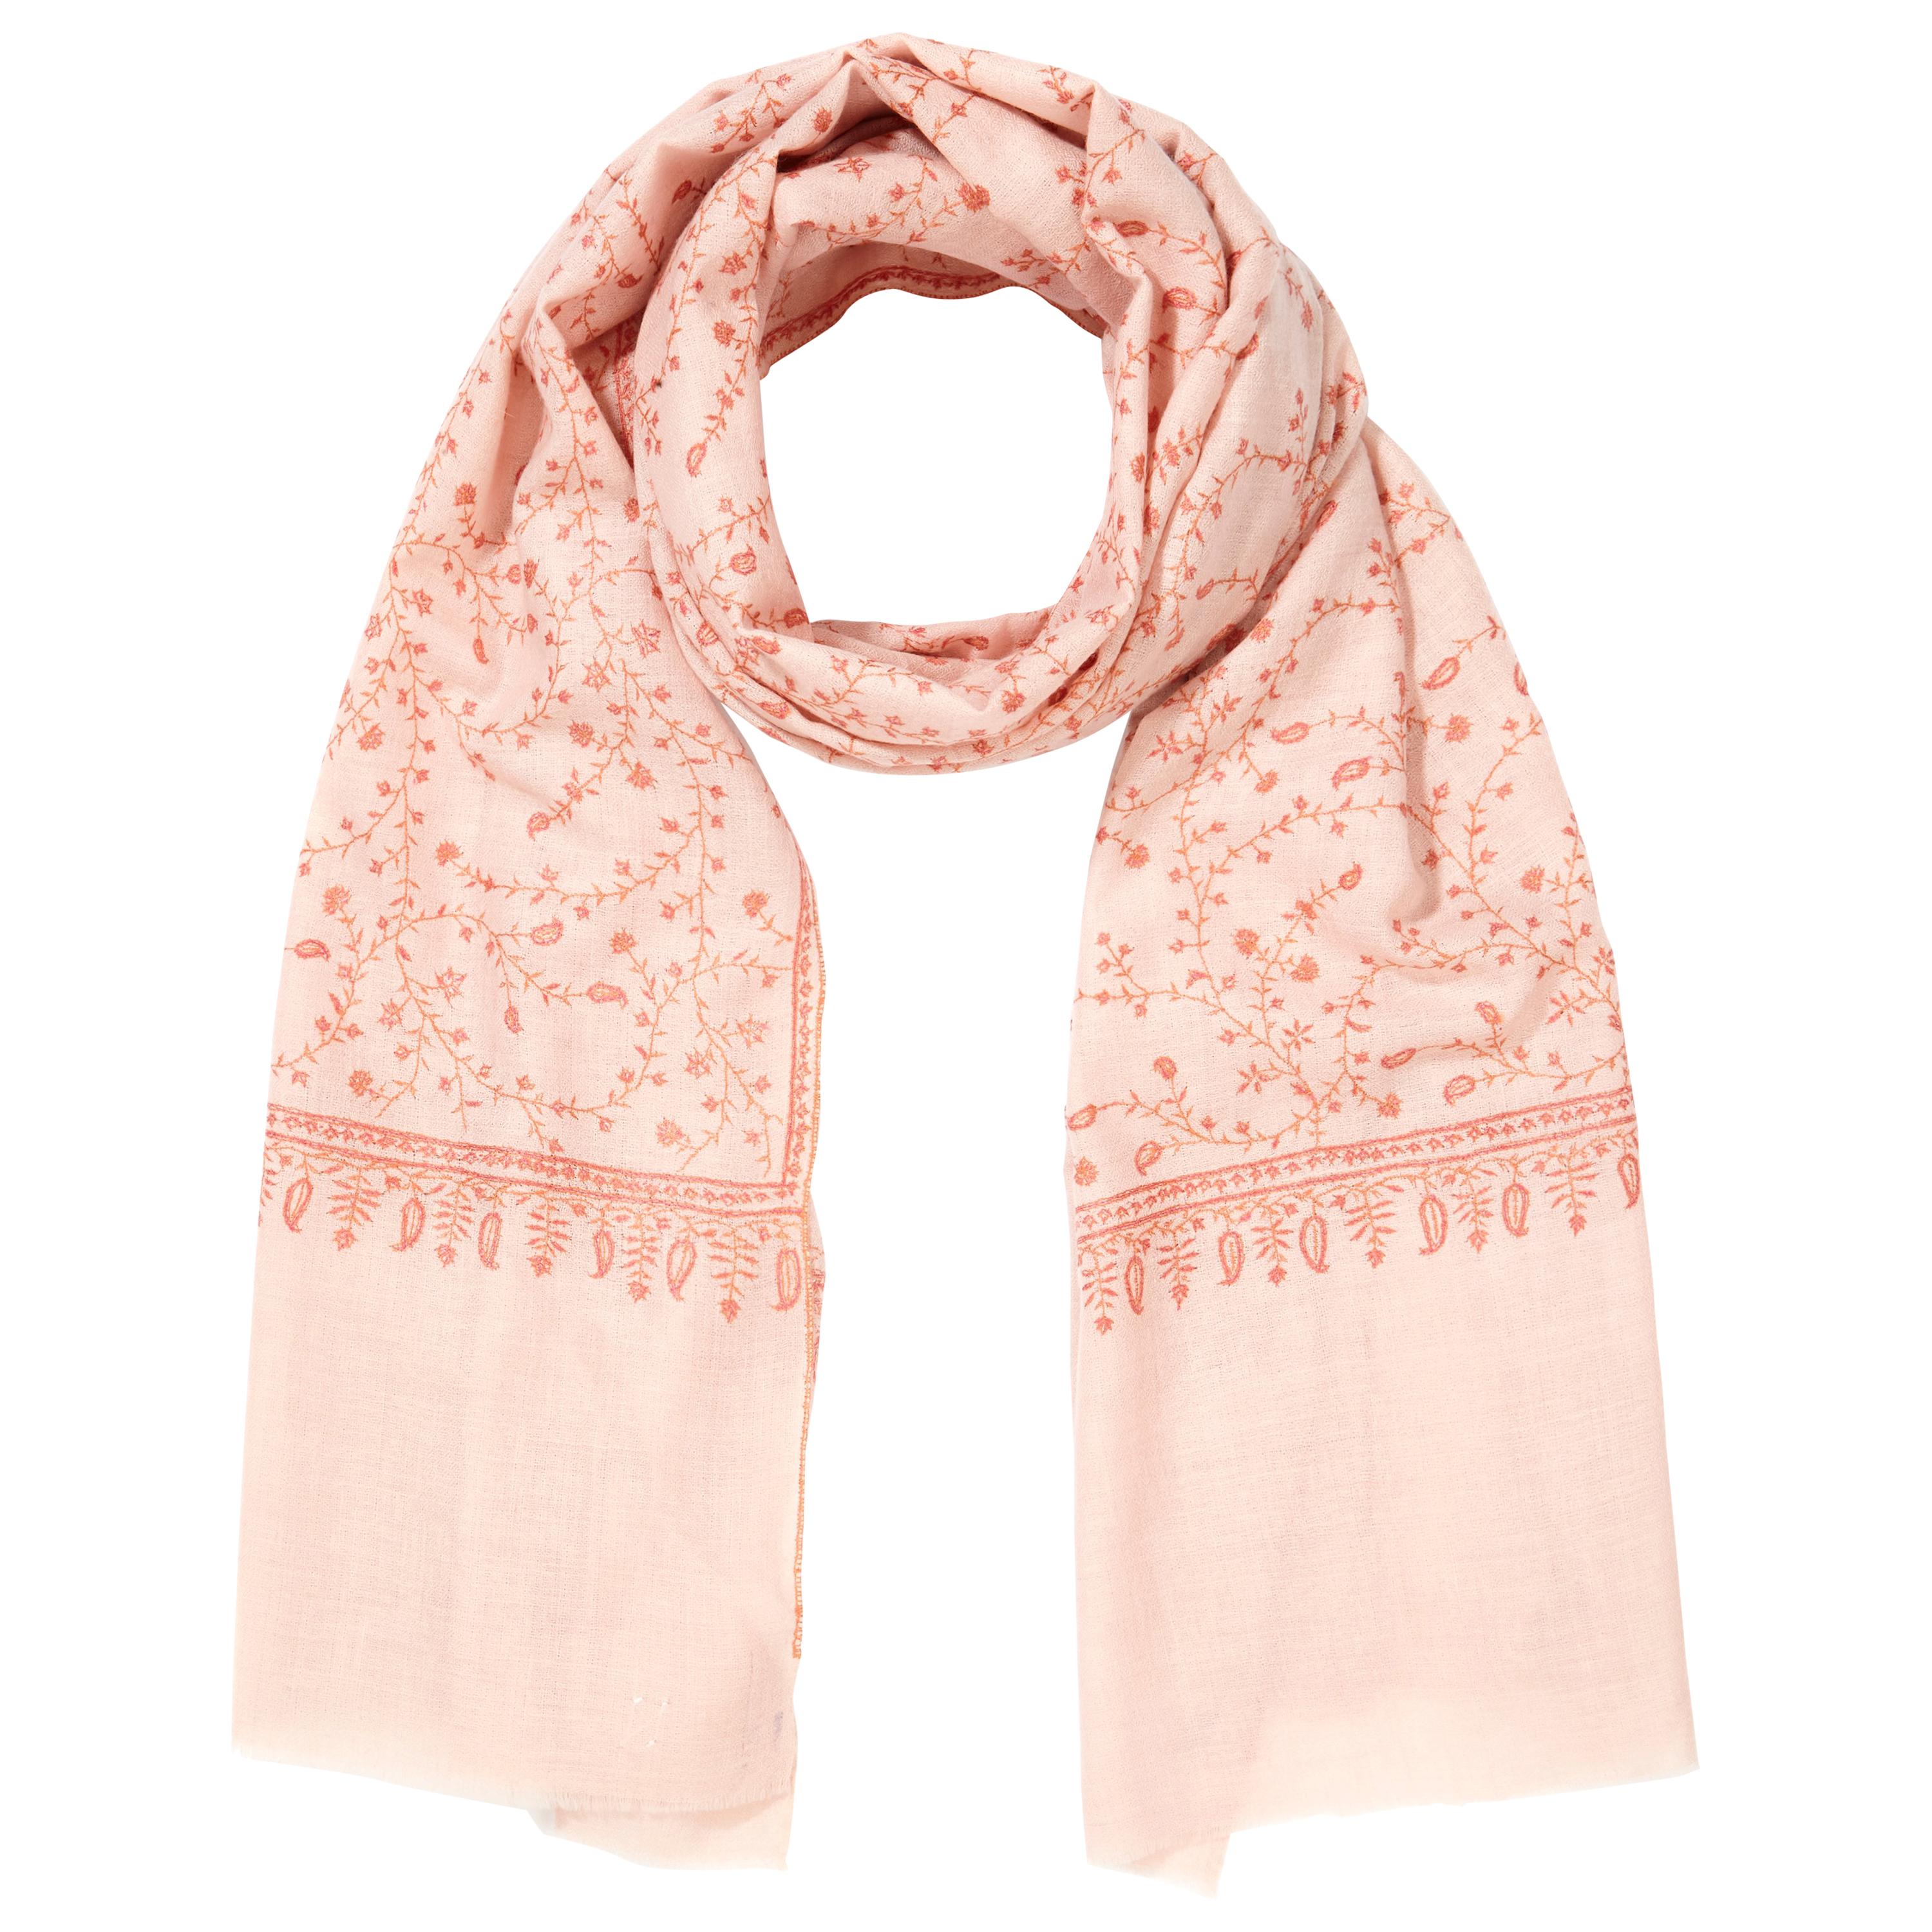 Limited Edition Hand Embroidered Pale Pink 100% Cashmere Shawl made in Kashmir  For Sale